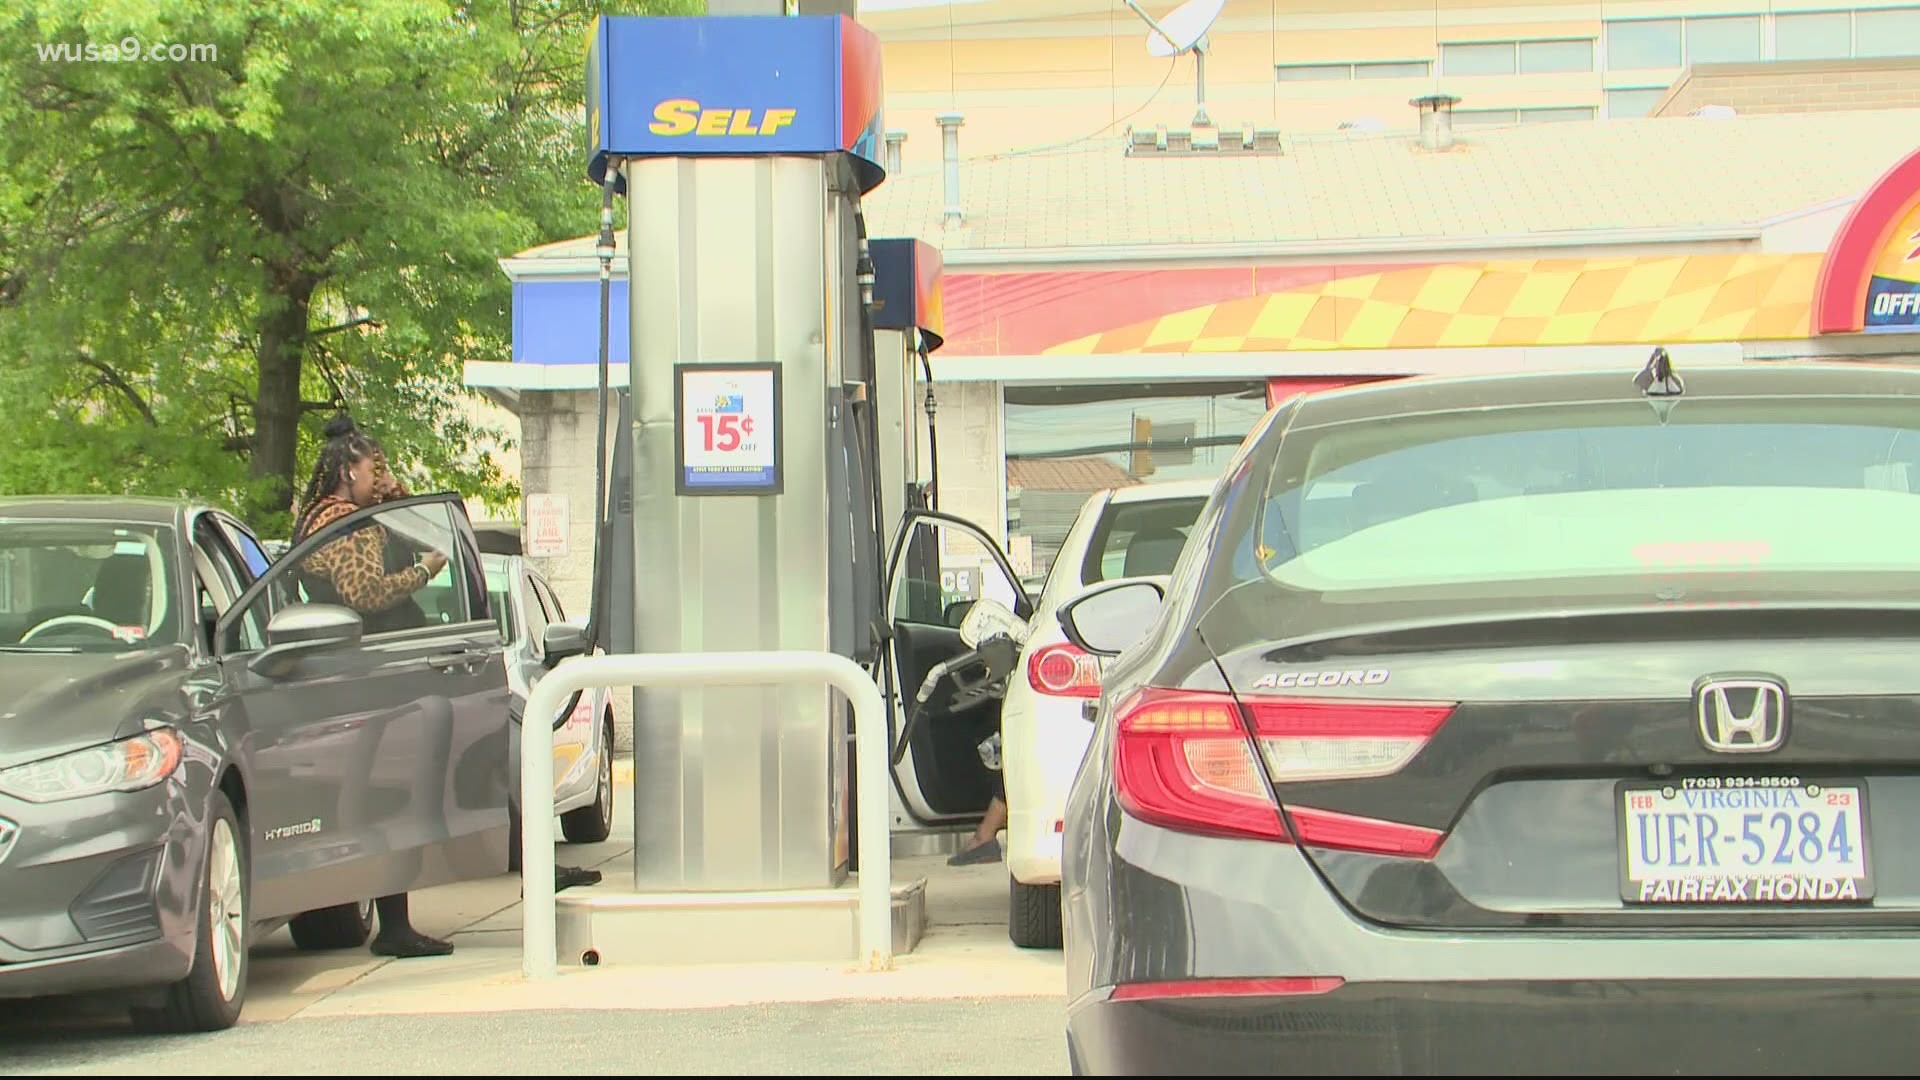 An Alexandria gas station had to close late and open early due to high demand.